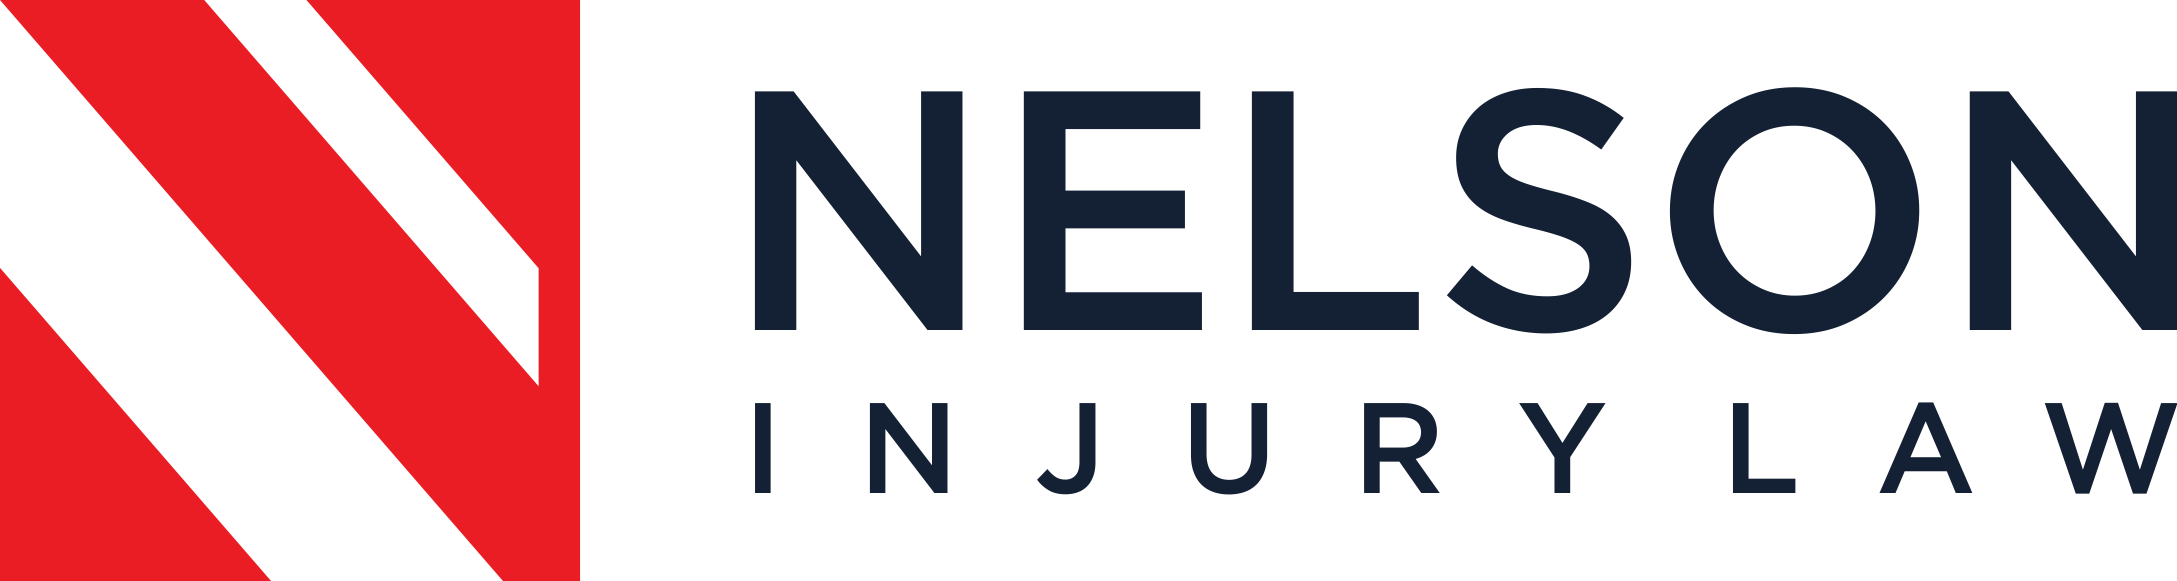 NELSON INJURY LAW